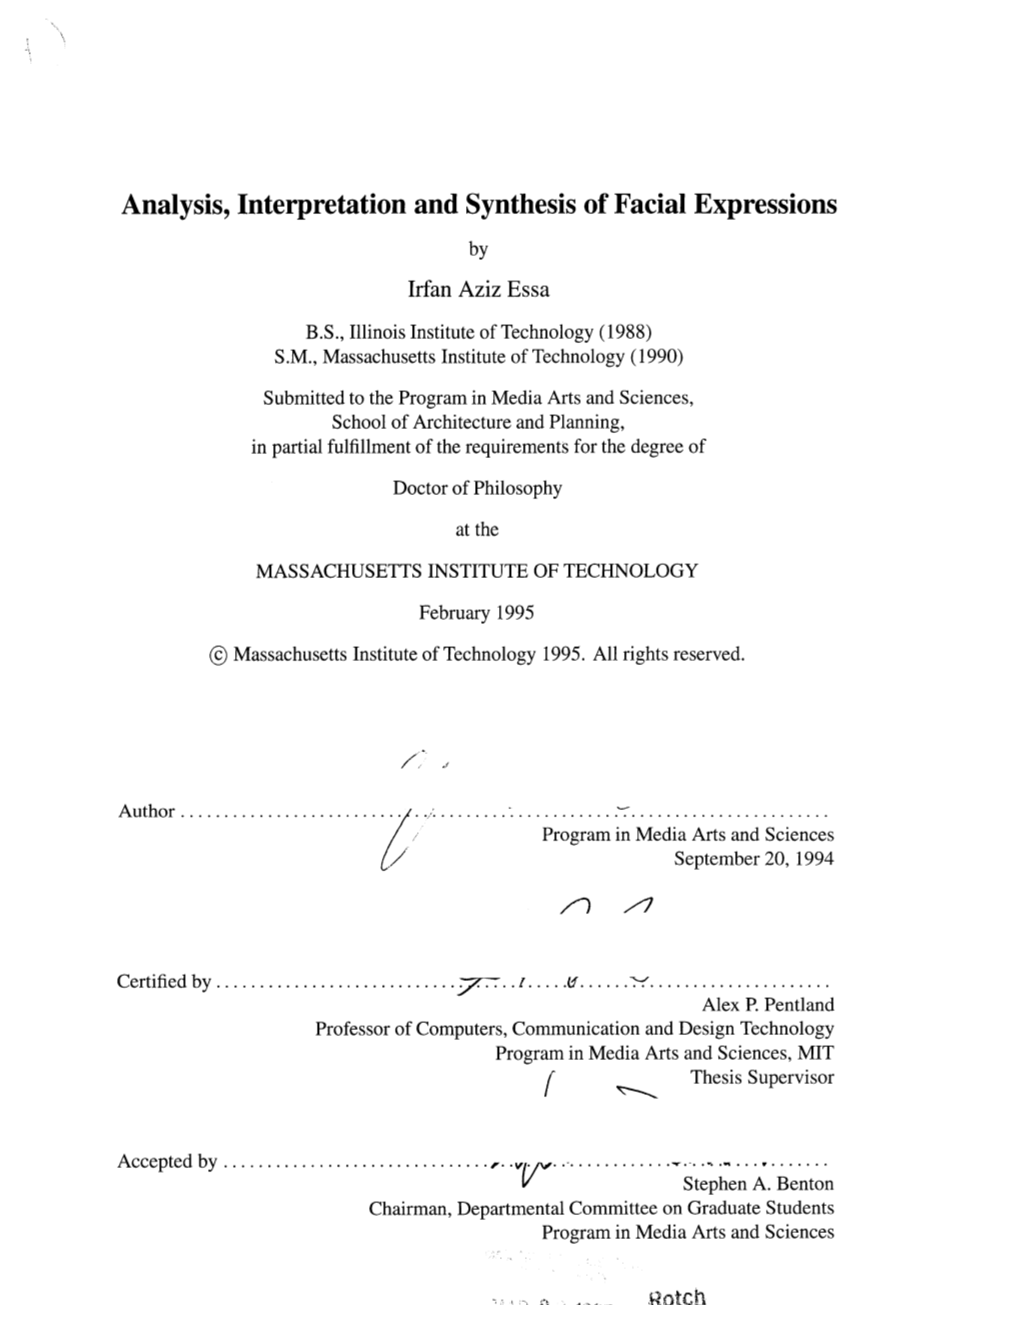 Analysis, Interpretation and Synthesis of Facial Expressions by Irfan Aziz Essa